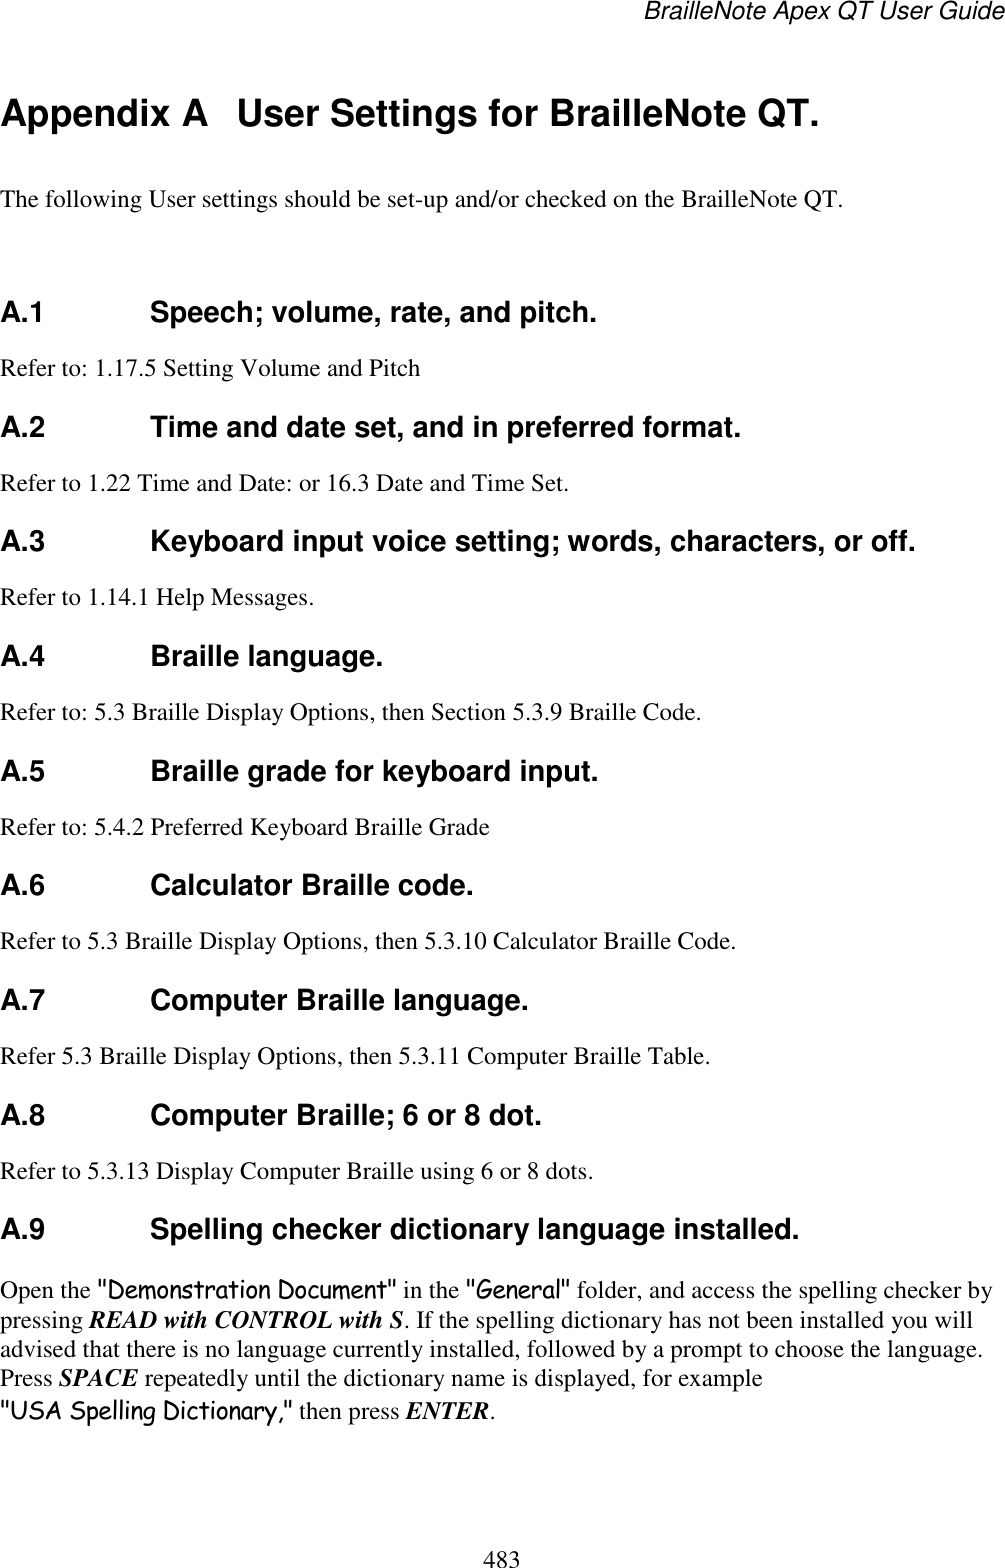 BrailleNote Apex QT User Guide  483  Appendix A  User Settings for BrailleNote QT. The following User settings should be set-up and/or checked on the BrailleNote QT.   A.1  Speech; volume, rate, and pitch. Refer to: 1.17.5 Setting Volume and Pitch  A.2  Time and date set, and in preferred format. Refer to 1.22 Time and Date: or 16.3 Date and Time Set.  A.3  Keyboard input voice setting; words, characters, or off. Refer to 1.14.1 Help Messages.  A.4  Braille language. Refer to: 5.3 Braille Display Options, then Section 5.3.9 Braille Code.  A.5  Braille grade for keyboard input. Refer to: 5.4.2 Preferred Keyboard Braille Grade  A.6  Calculator Braille code. Refer to 5.3 Braille Display Options, then 5.3.10 Calculator Braille Code.  A.7  Computer Braille language. Refer 5.3 Braille Display Options, then 5.3.11 Computer Braille Table.  A.8  Computer Braille; 6 or 8 dot. Refer to 5.3.13 Display Computer Braille using 6 or 8 dots.  A.9  Spelling checker dictionary language installed. Open the &quot;Demonstration Document&quot; in the &quot;General&quot; folder, and access the spelling checker by pressing READ with CONTROL with S. If the spelling dictionary has not been installed you will advised that there is no language currently installed, followed by a prompt to choose the language. Press SPACE repeatedly until the dictionary name is displayed, for example &quot;USA Spelling Dictionary,&quot; then press ENTER.  